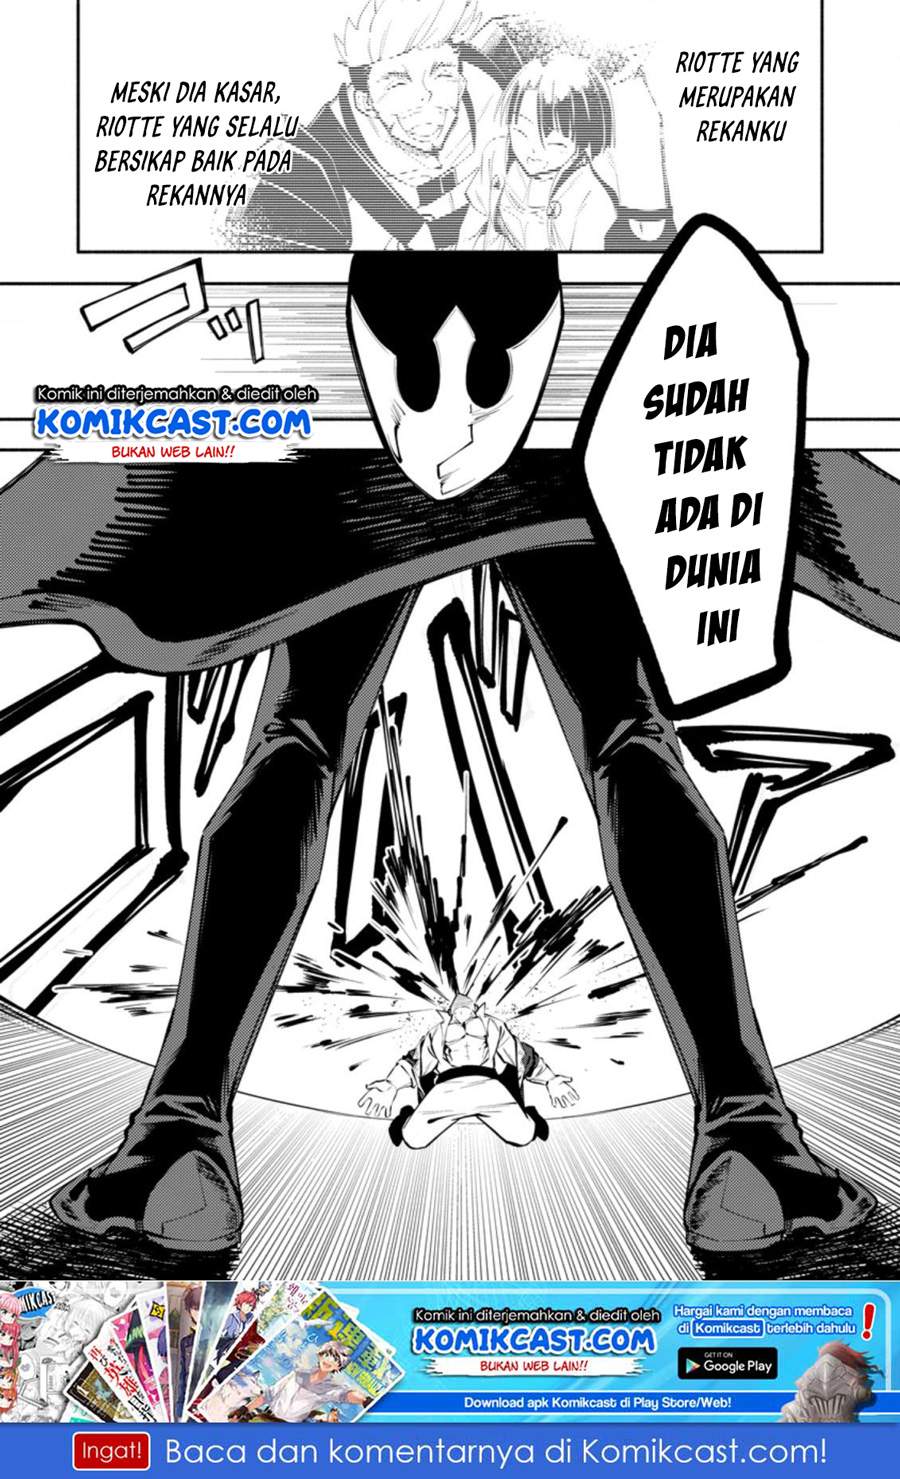 My Lover Was Stolen, And I Was Kicked Out Of The Hero’s Party, But I Awakened To The EX Skill “Fixed Damage” And Became Invincible. Now, Let’s Begin Some Revenge Chapter 03.1 Bahasa Indonesia